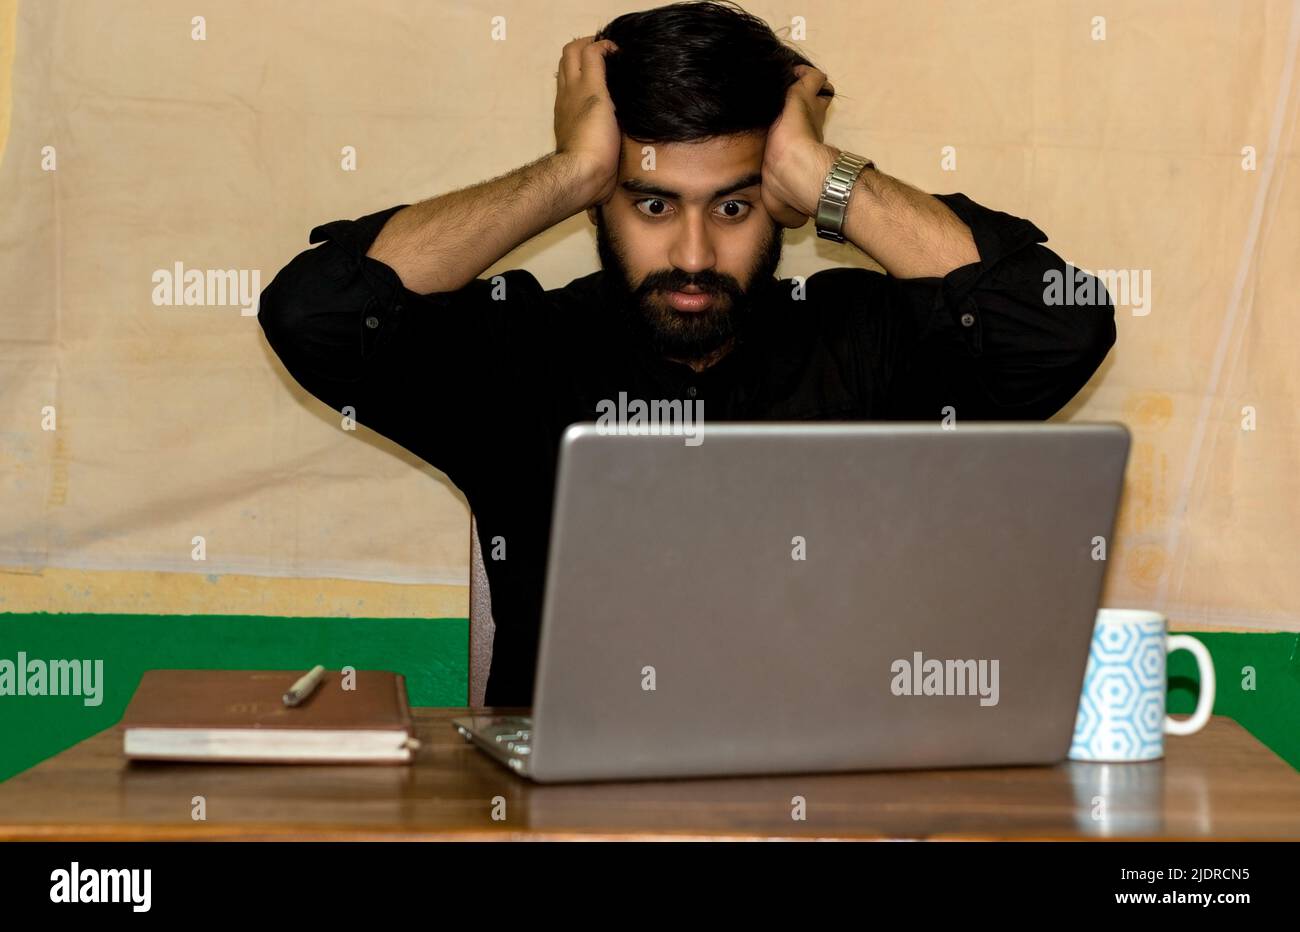 A young Indian man sitting on a chair and giving stressed expression looking at laptop screen. Selective focus on face. Stock Photo